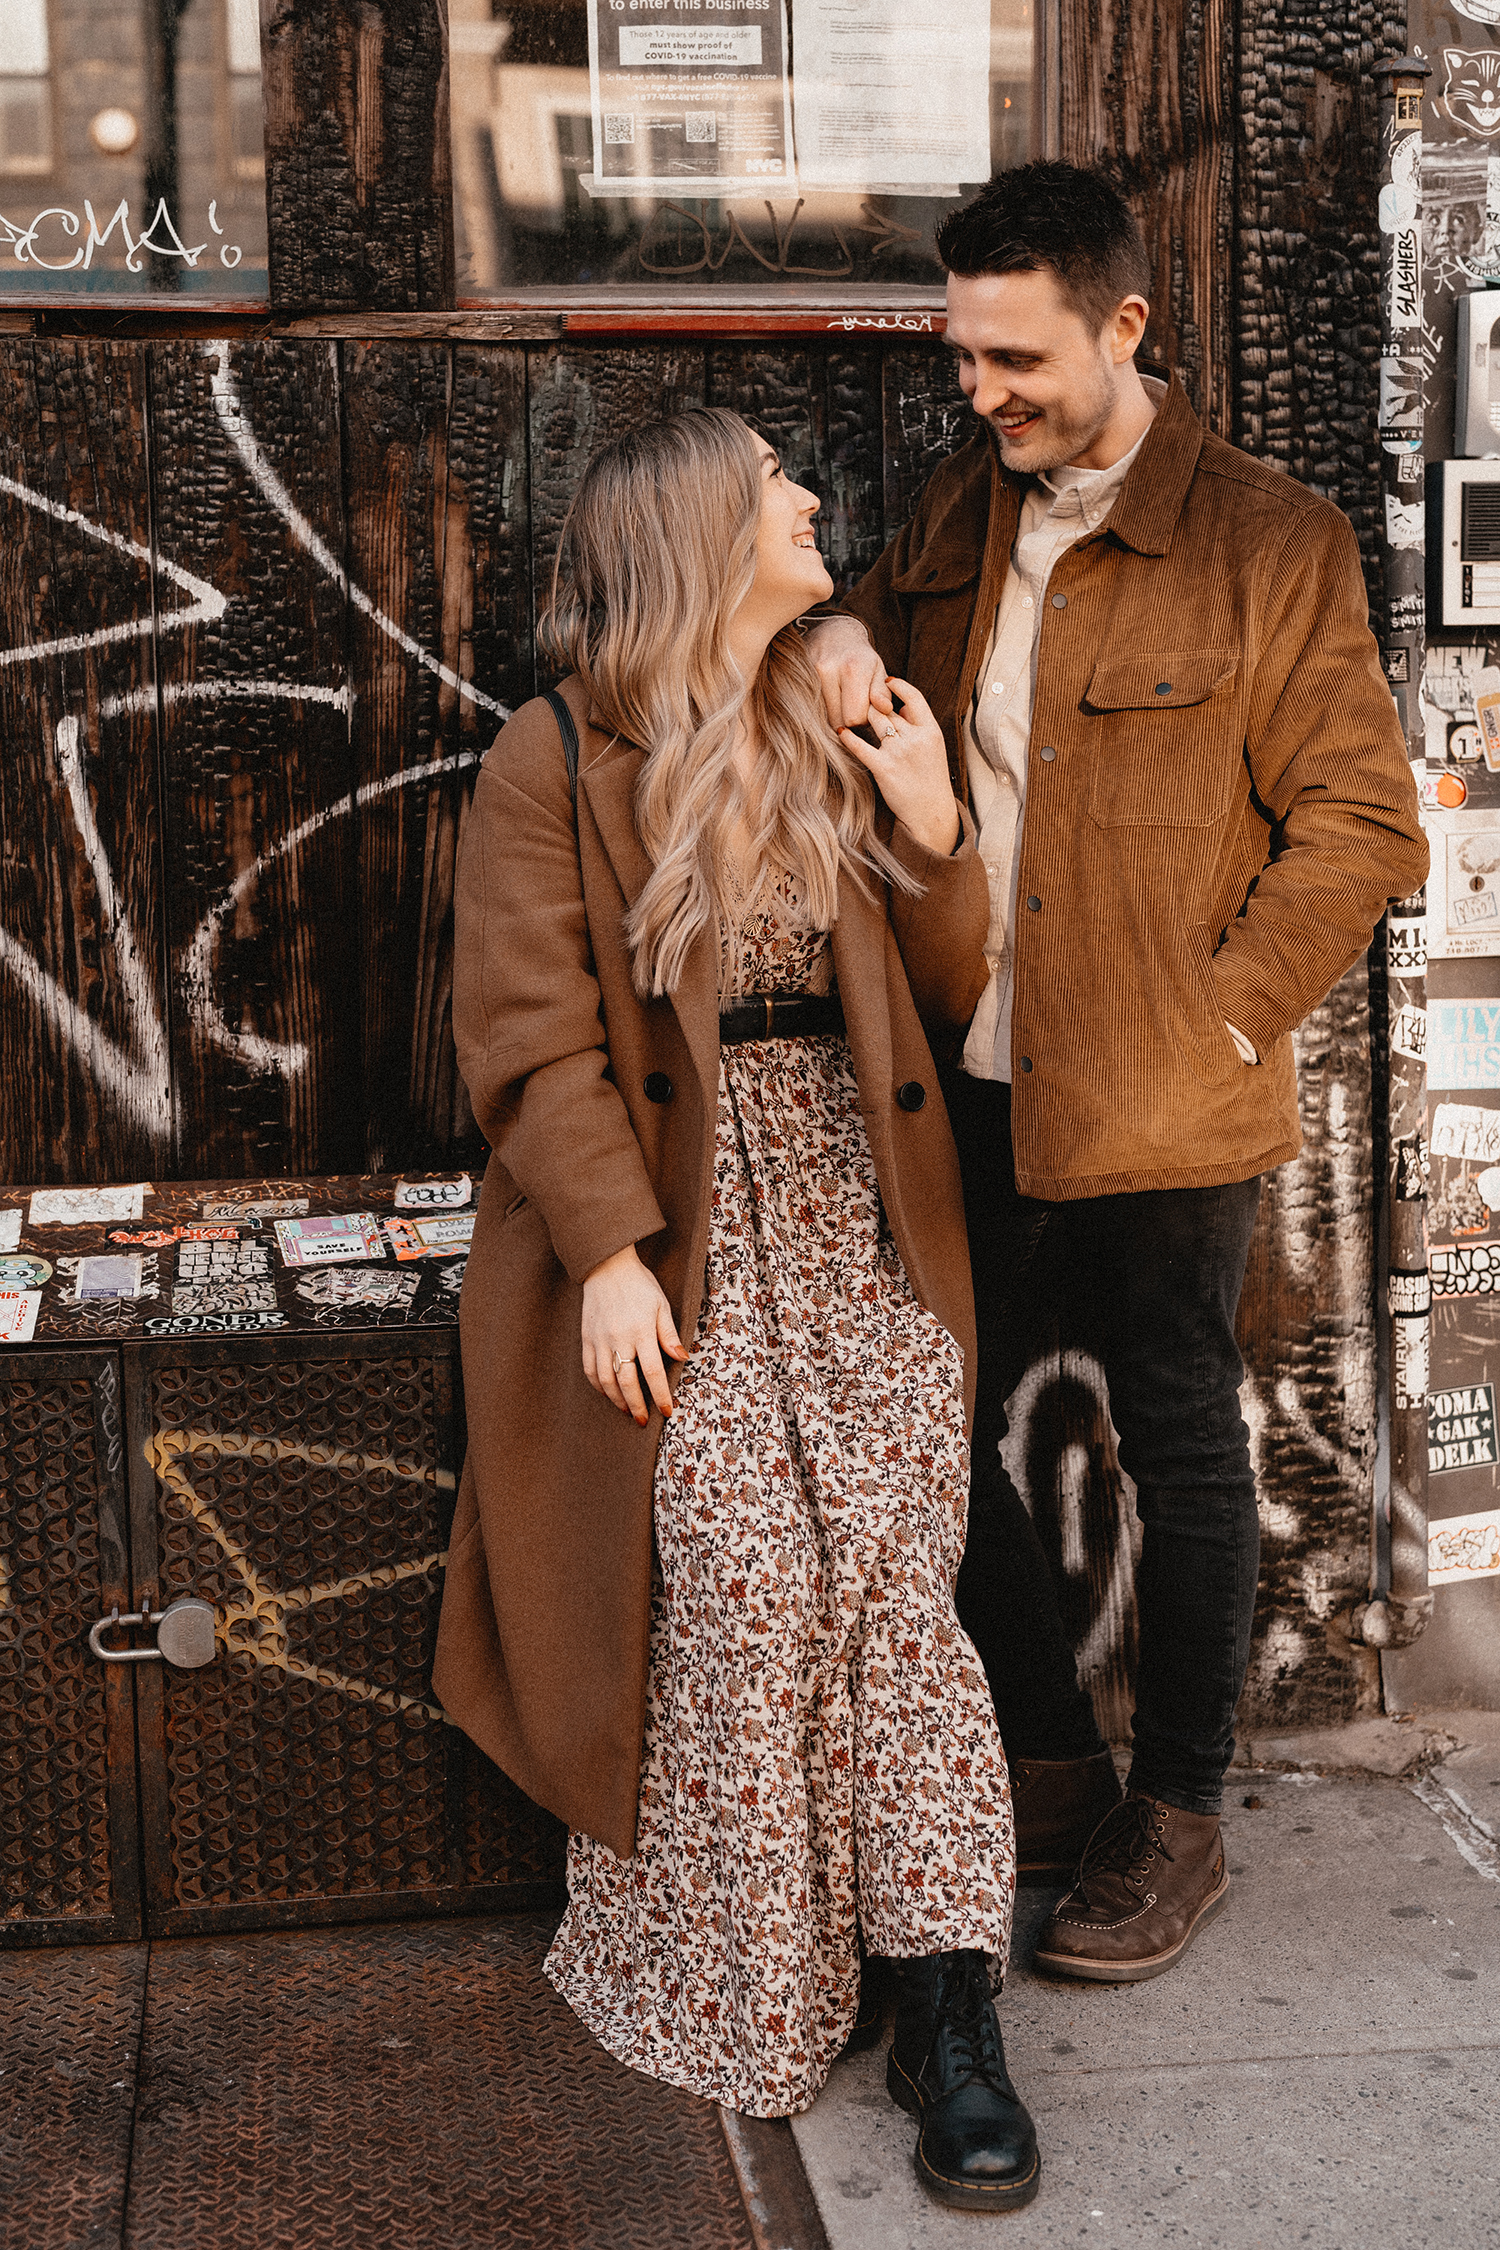 Warm and cozy engagement photos in Williamsburg Brooklyn, New York